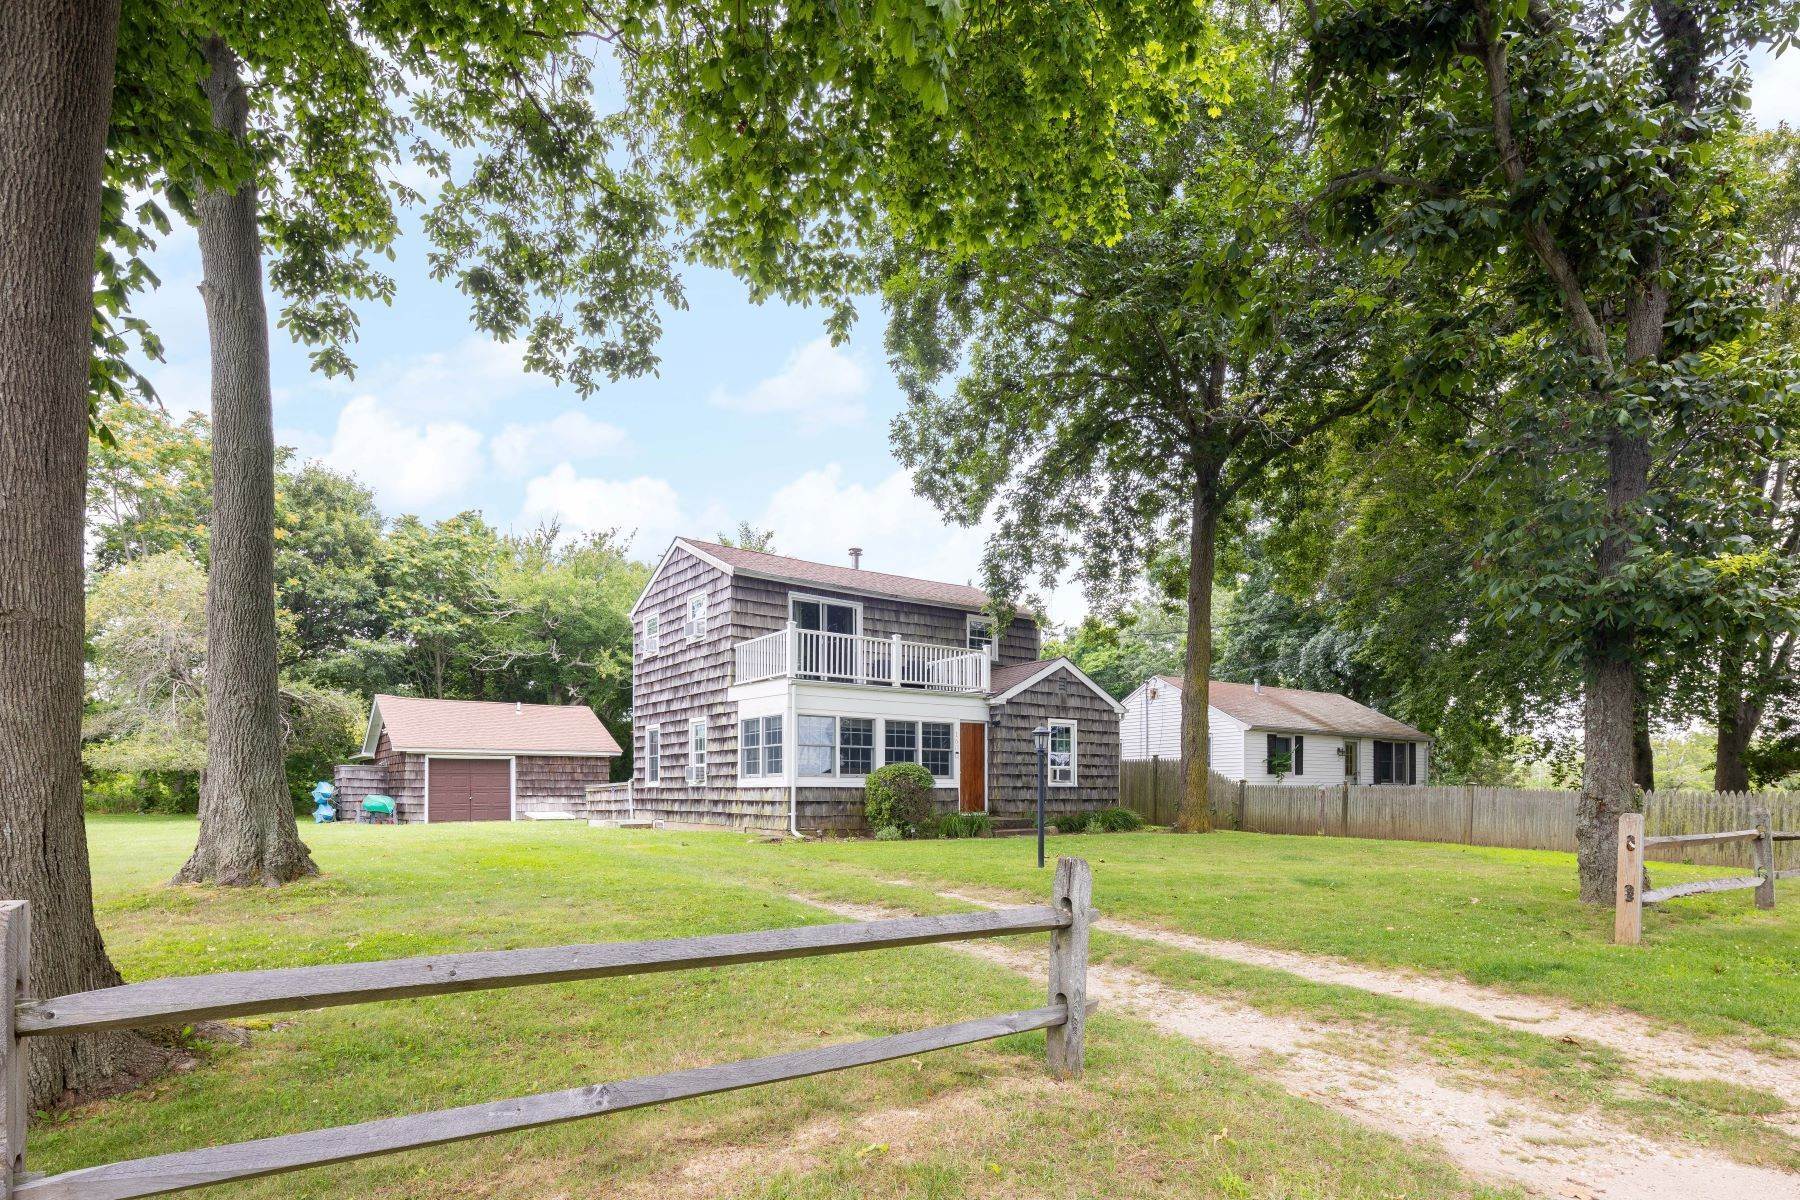 Single Family Homes for Sale at 160 Bayview Avenue, Greenport, NY, 11944 160 Bayview Avenue Greenport, New York 11944 United States